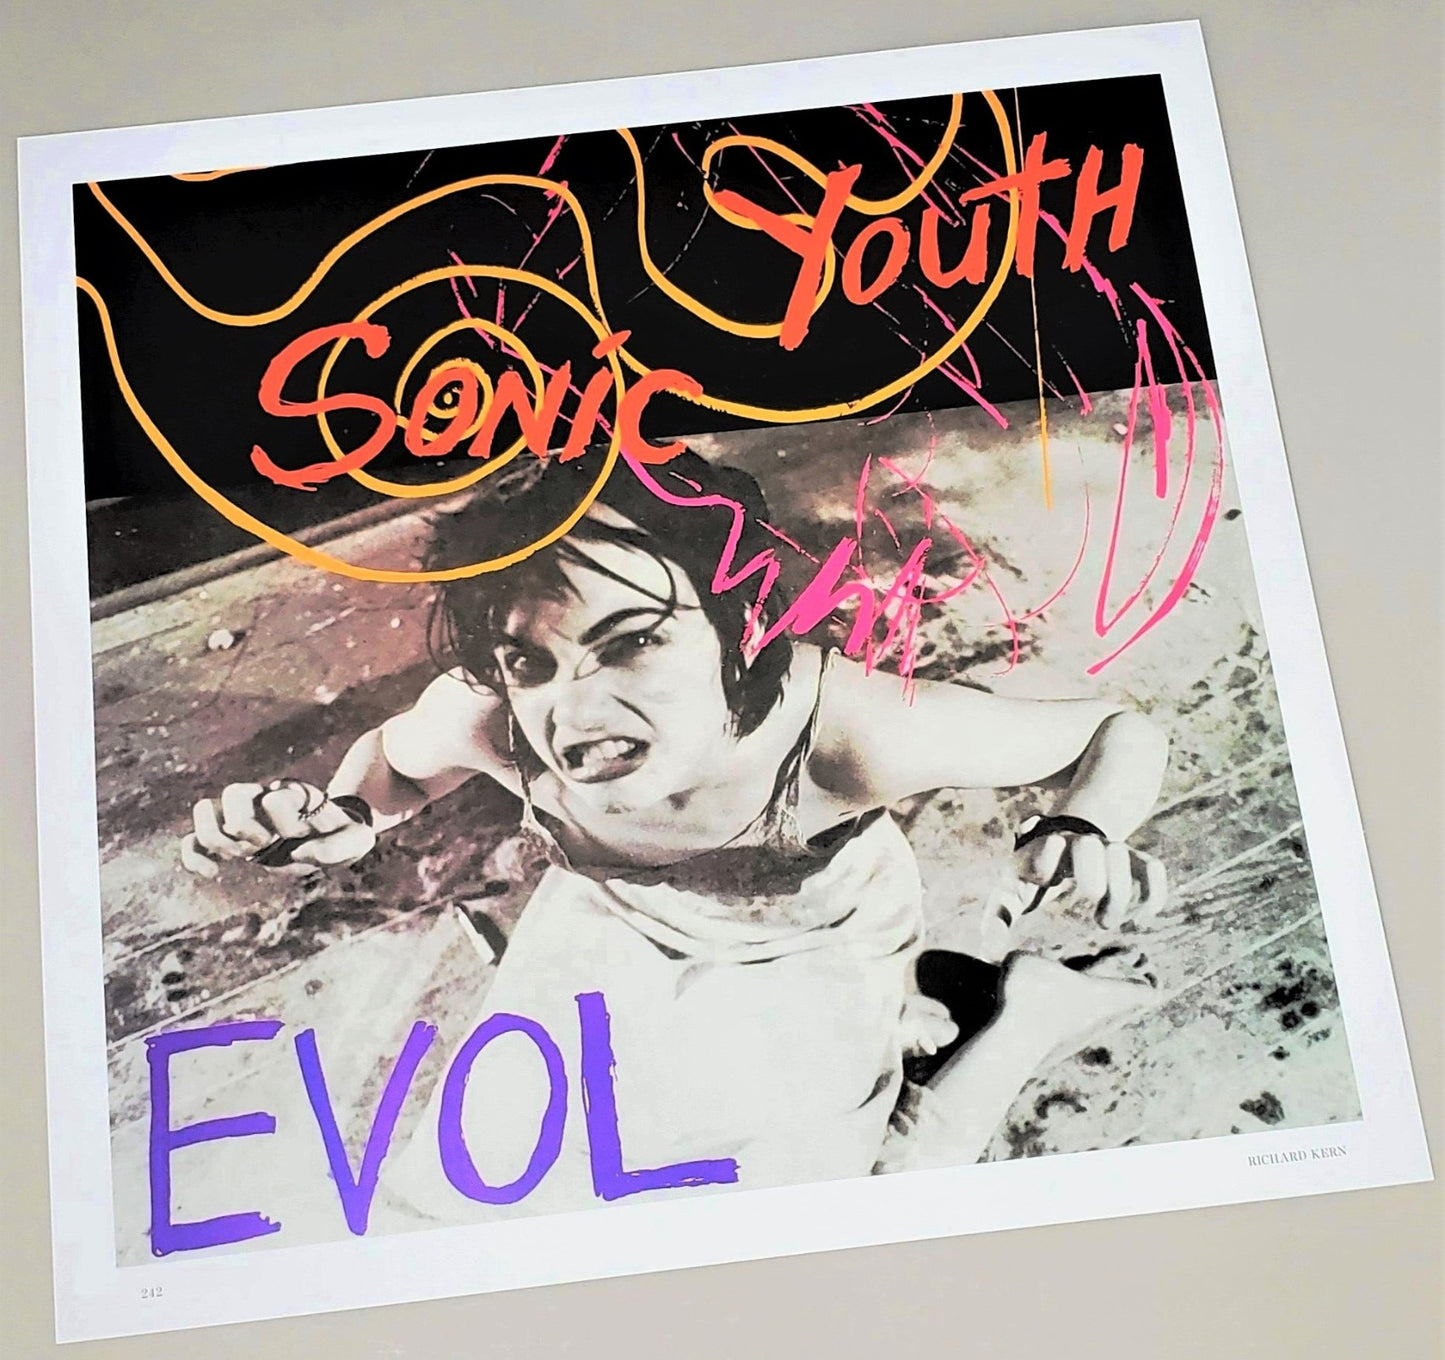 Sonic Youth 1986 CD cover featured in 2017 Art Record Covers coffee table book